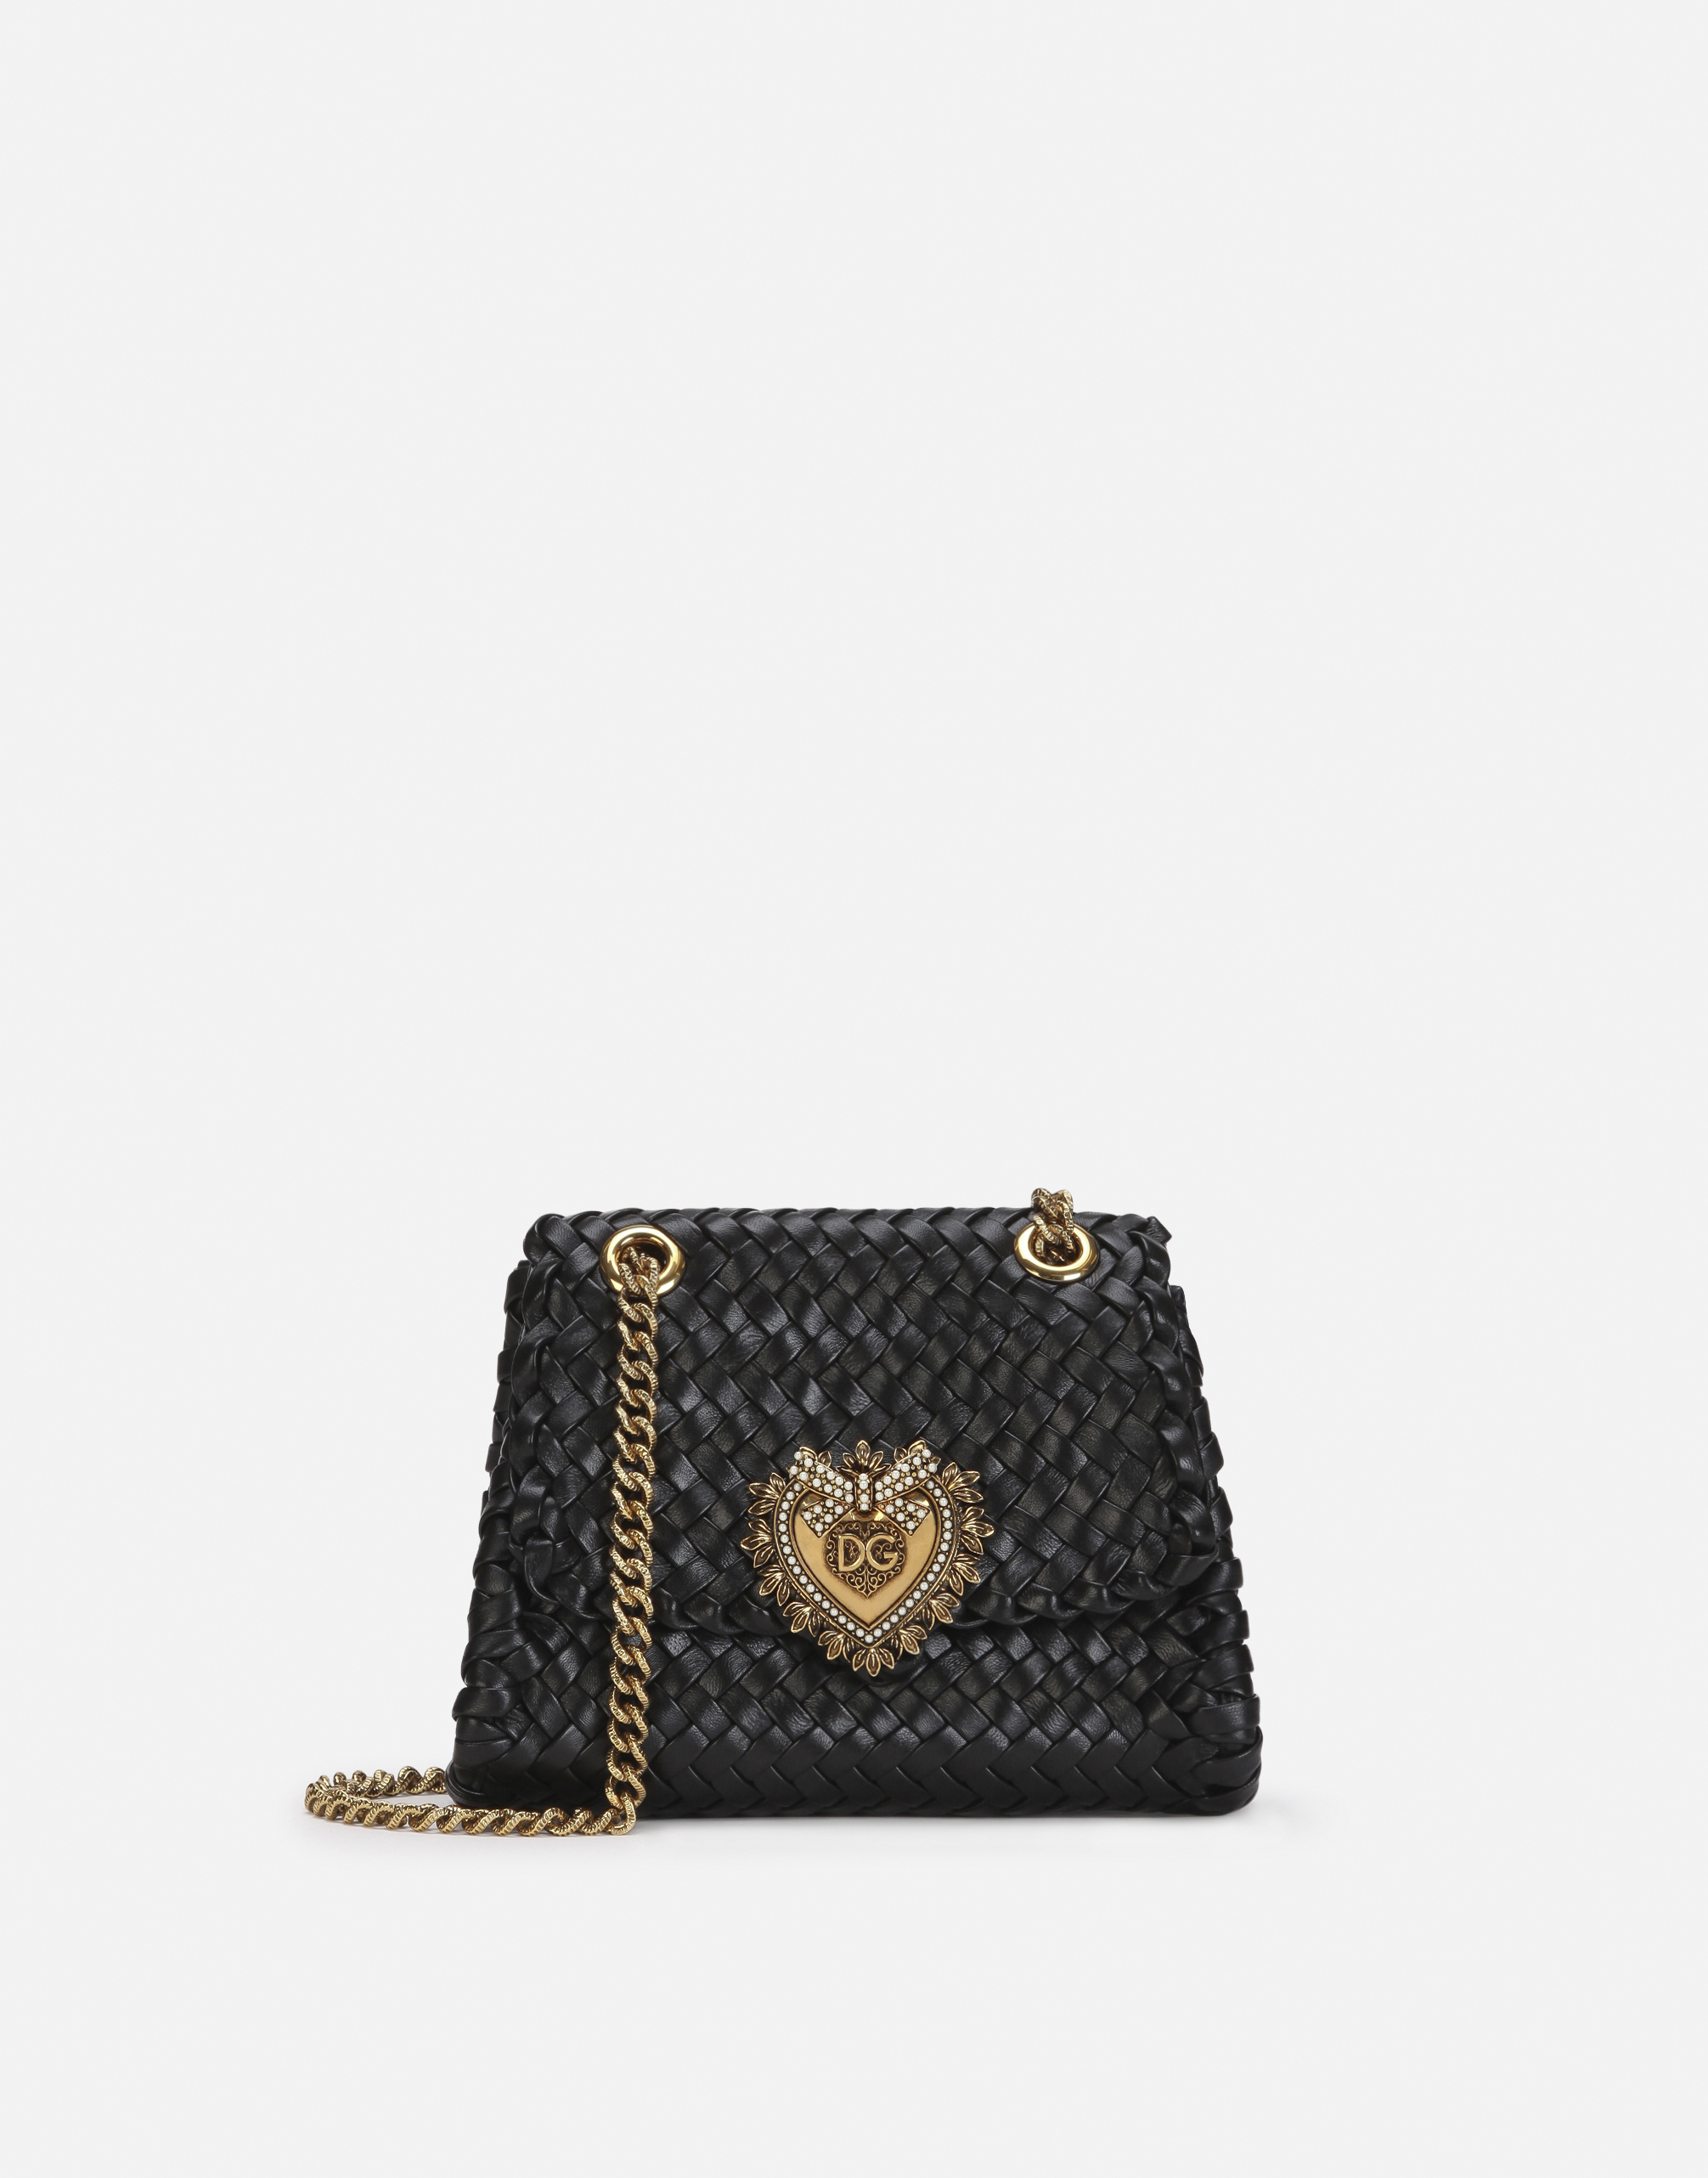 Small Devotion shoulder bag in woven nappa leather in Black